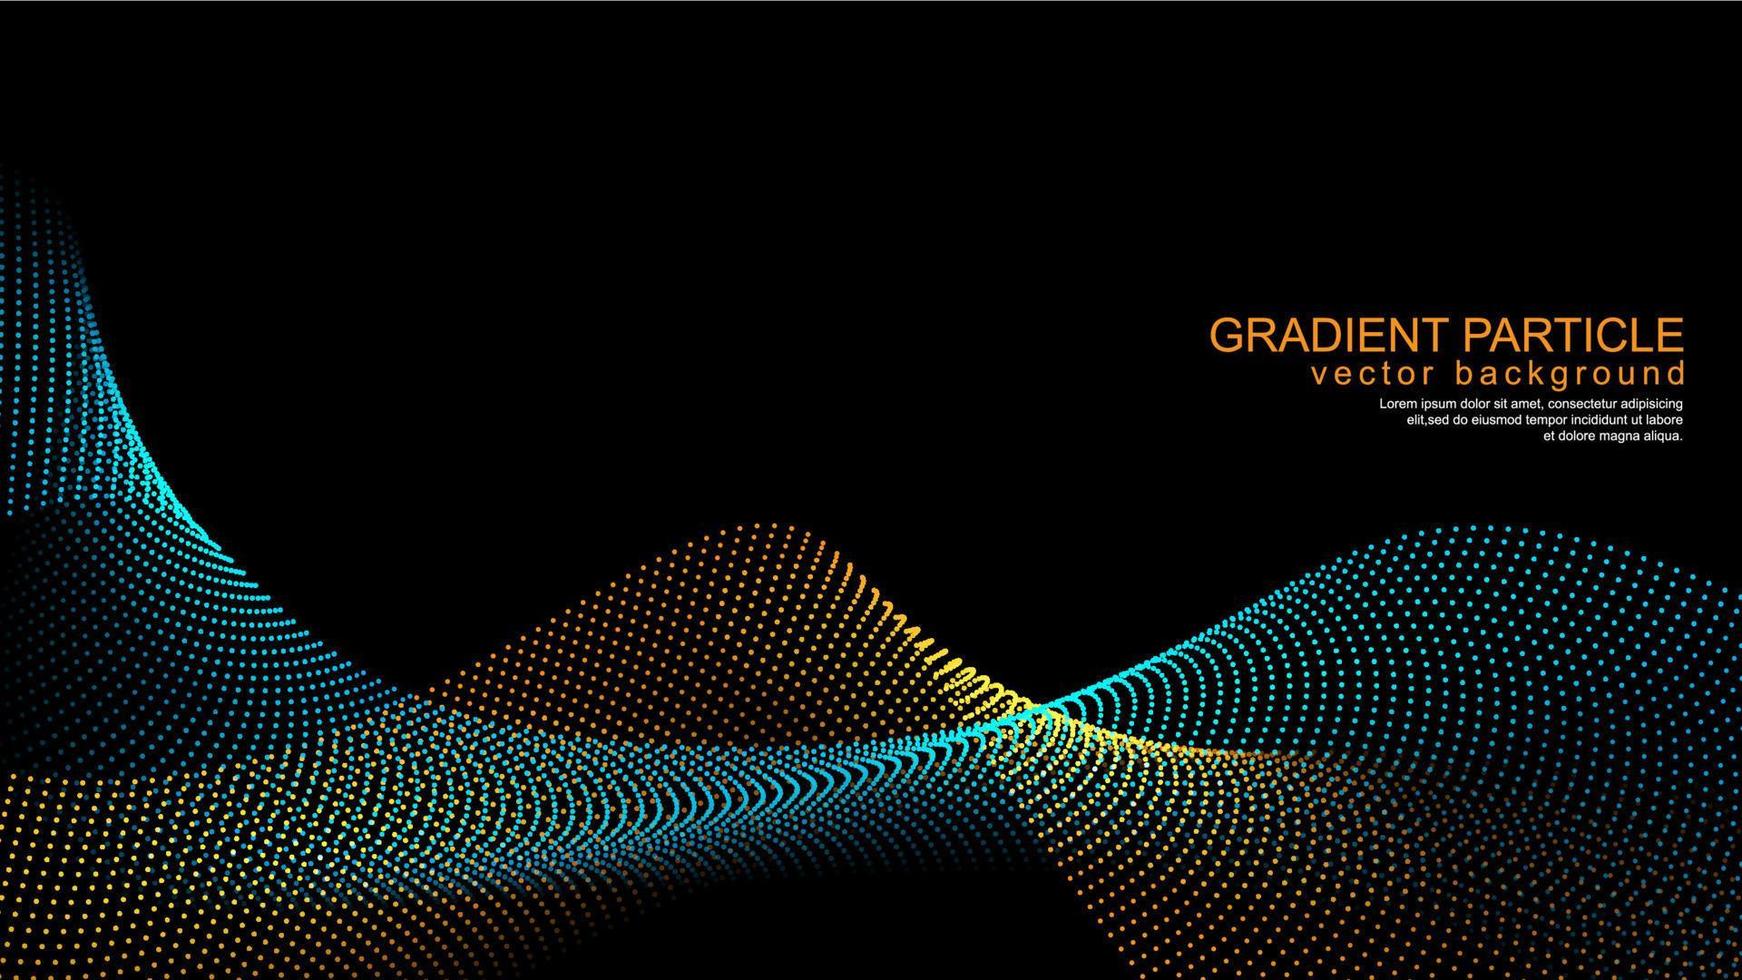 Gradient wave particles on black background vector